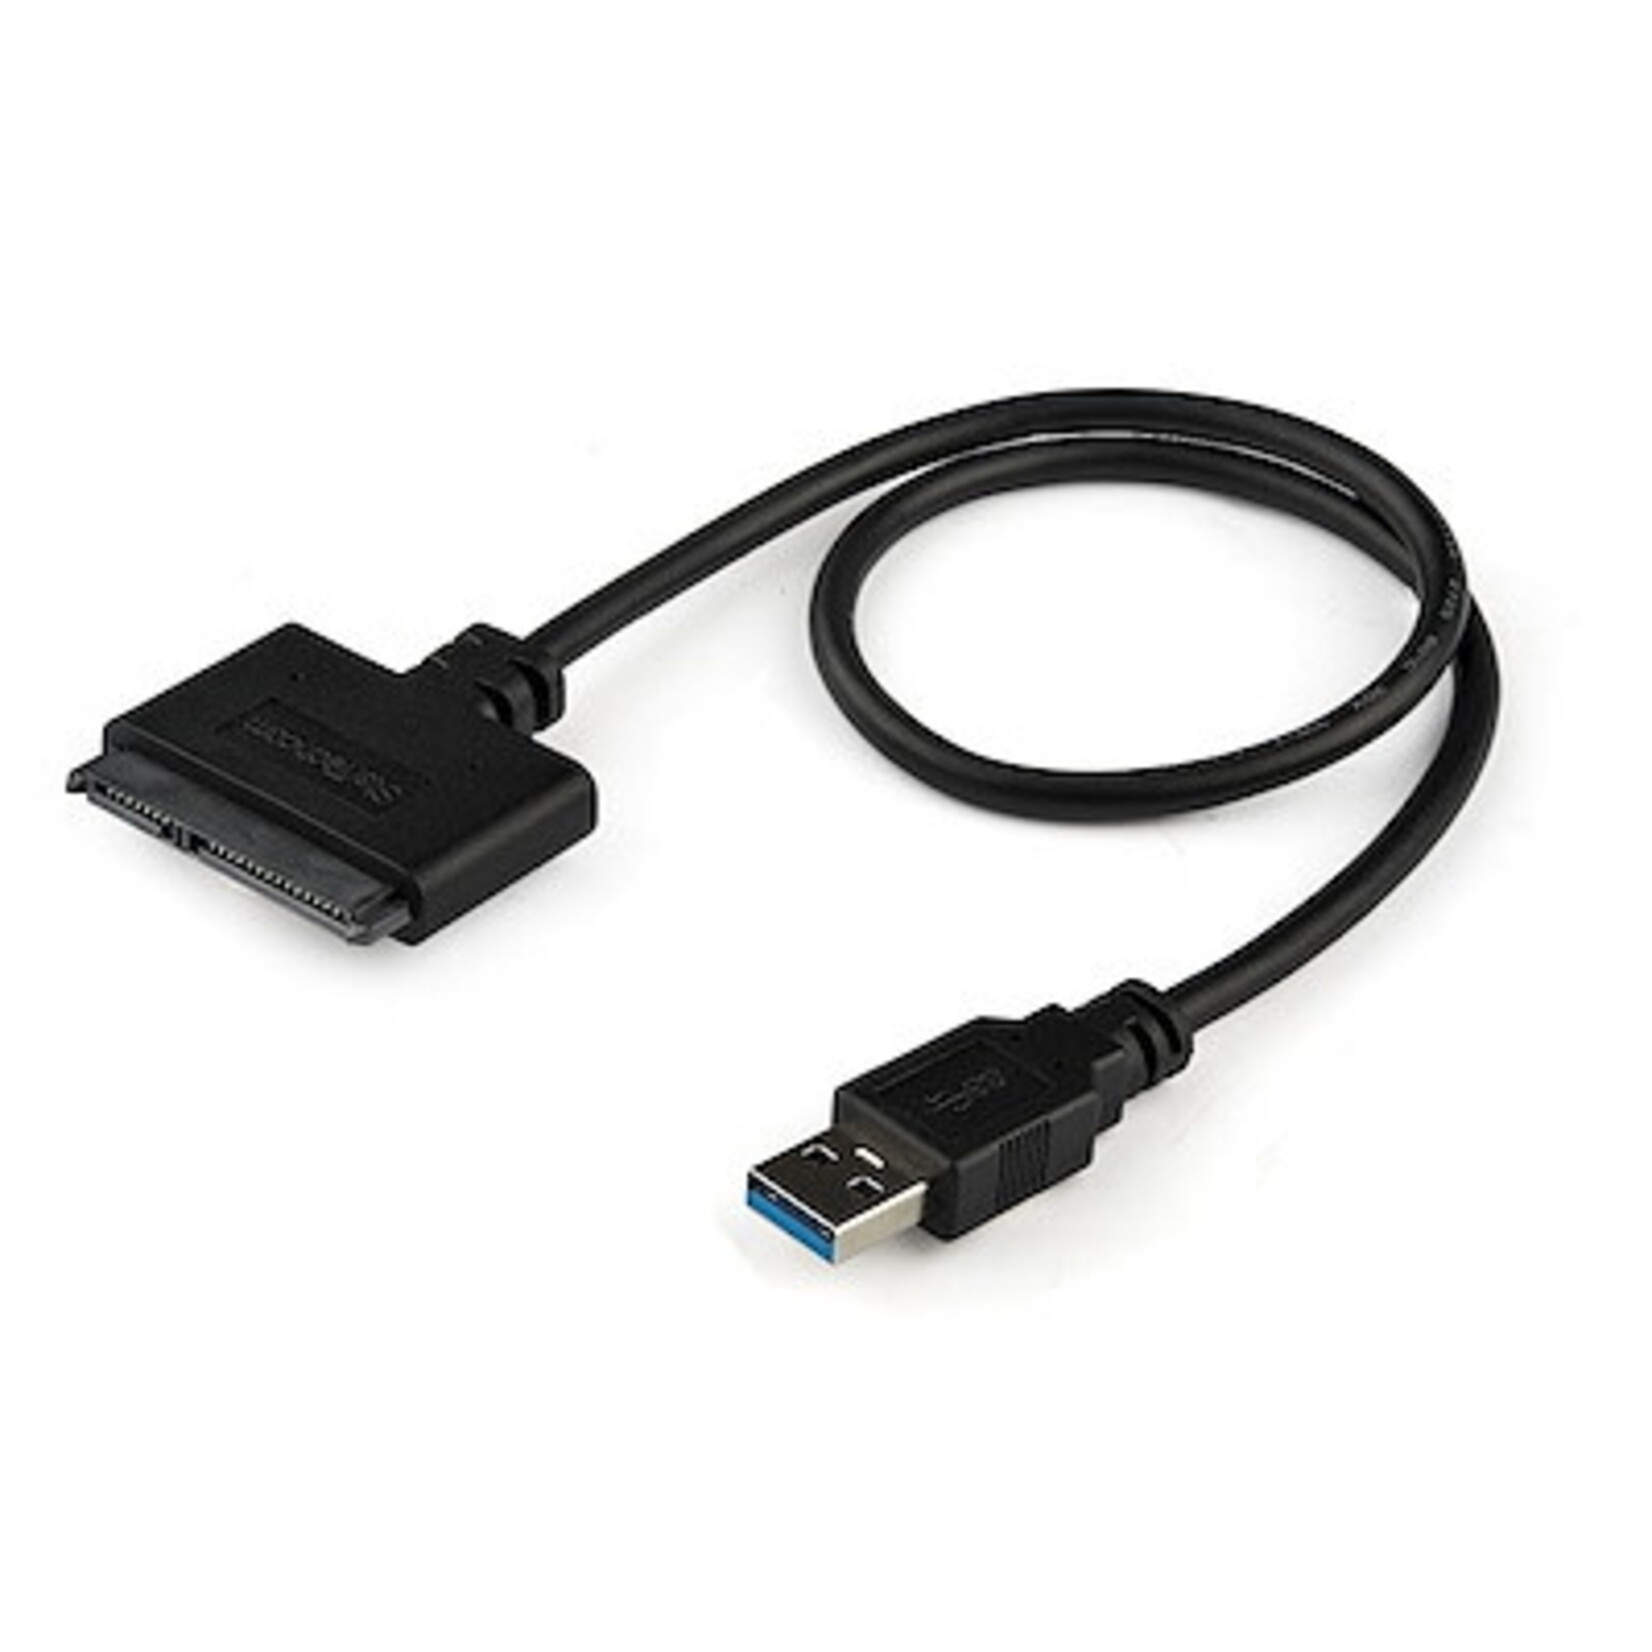 Startech USB3 to SATA HDD Adapter